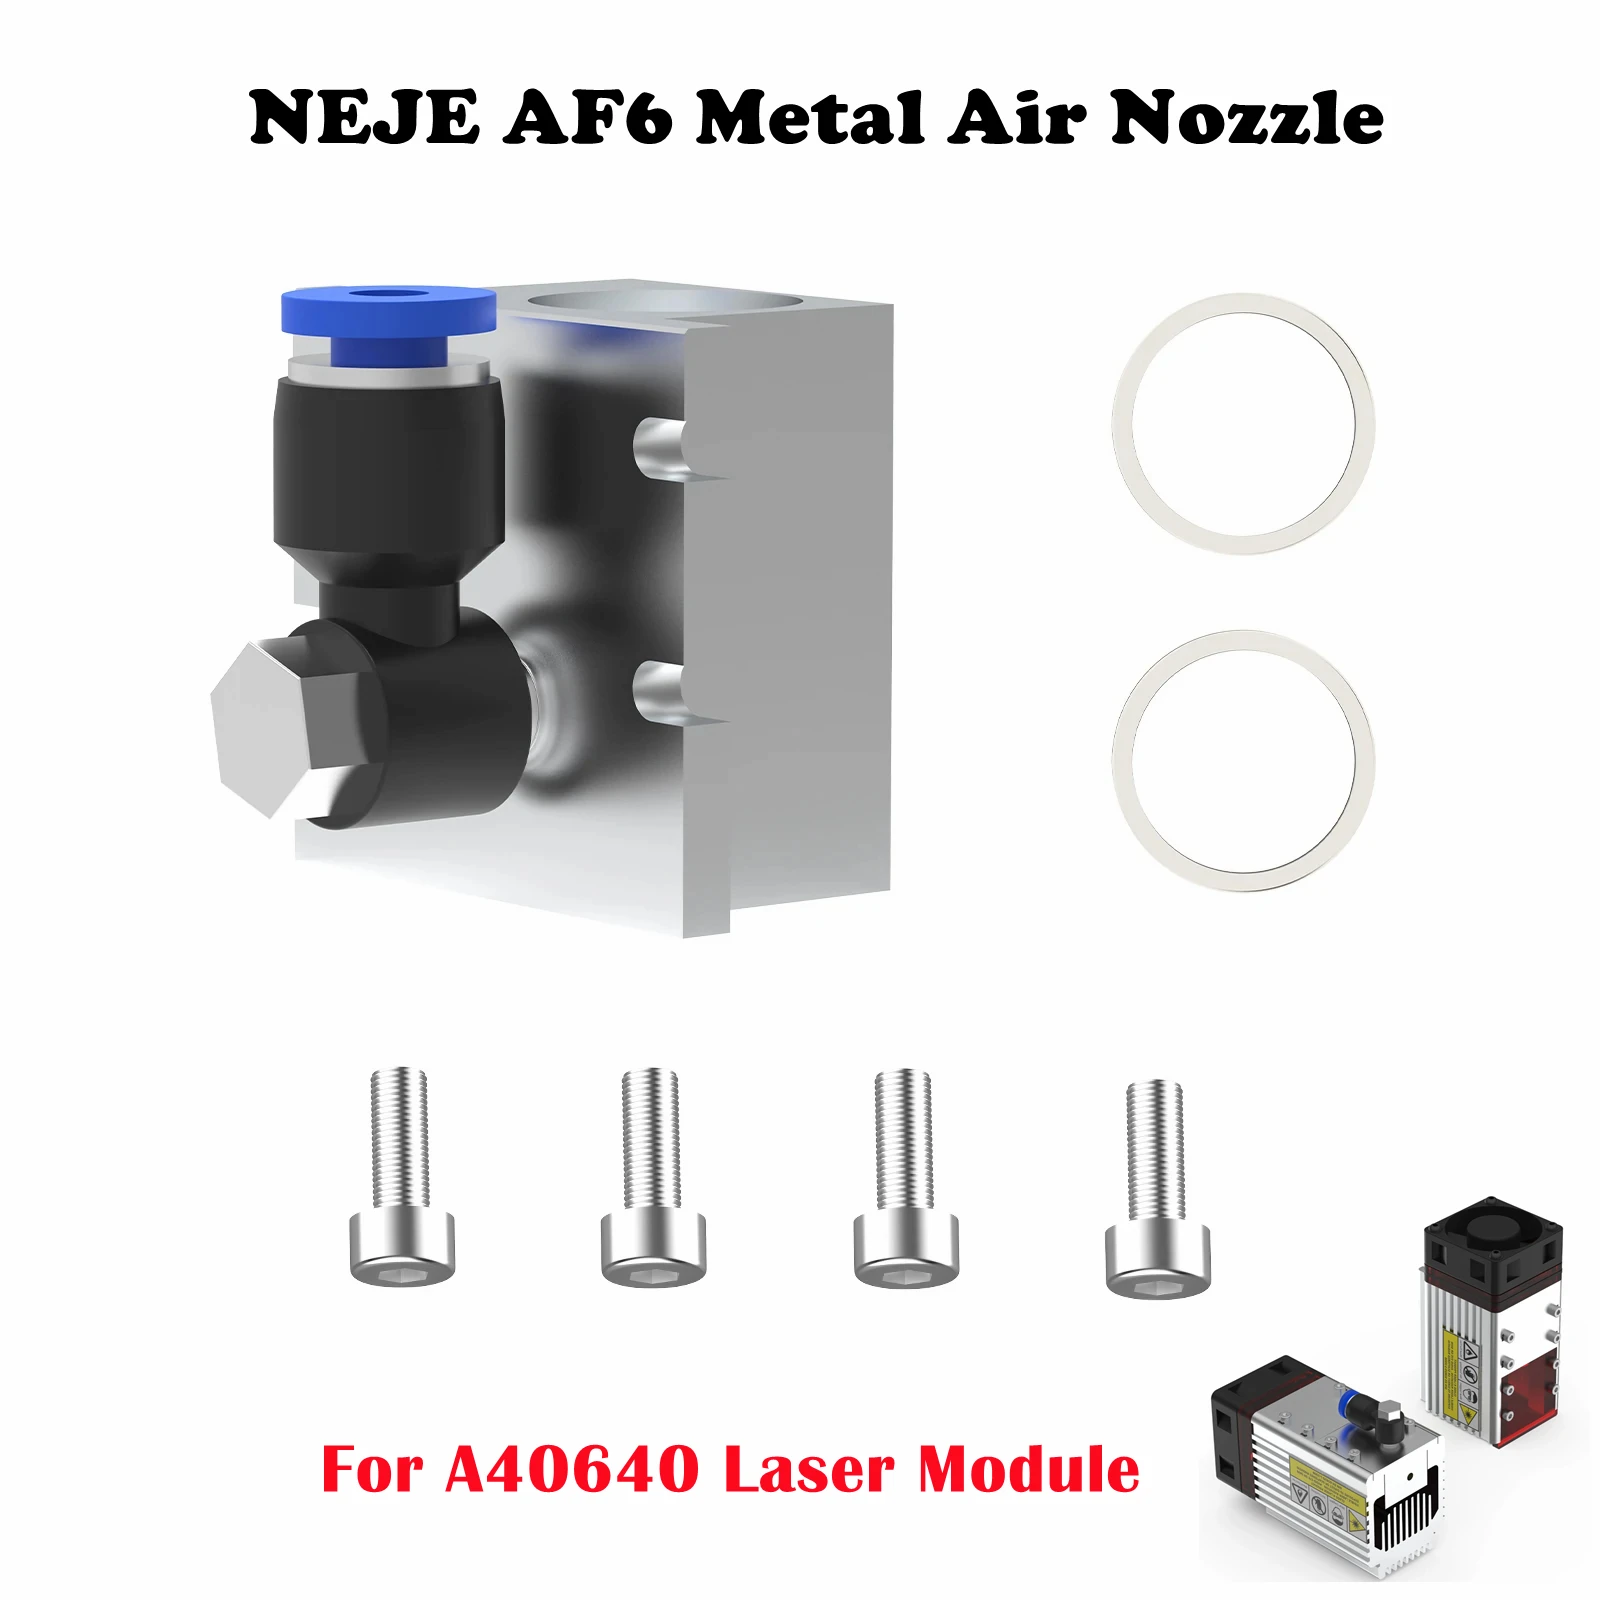 NEJE AF6 CNC Metal Air Nozzle Accessories for NEJE A40640 Laser Module  High Pressure Max 1.5Mpa